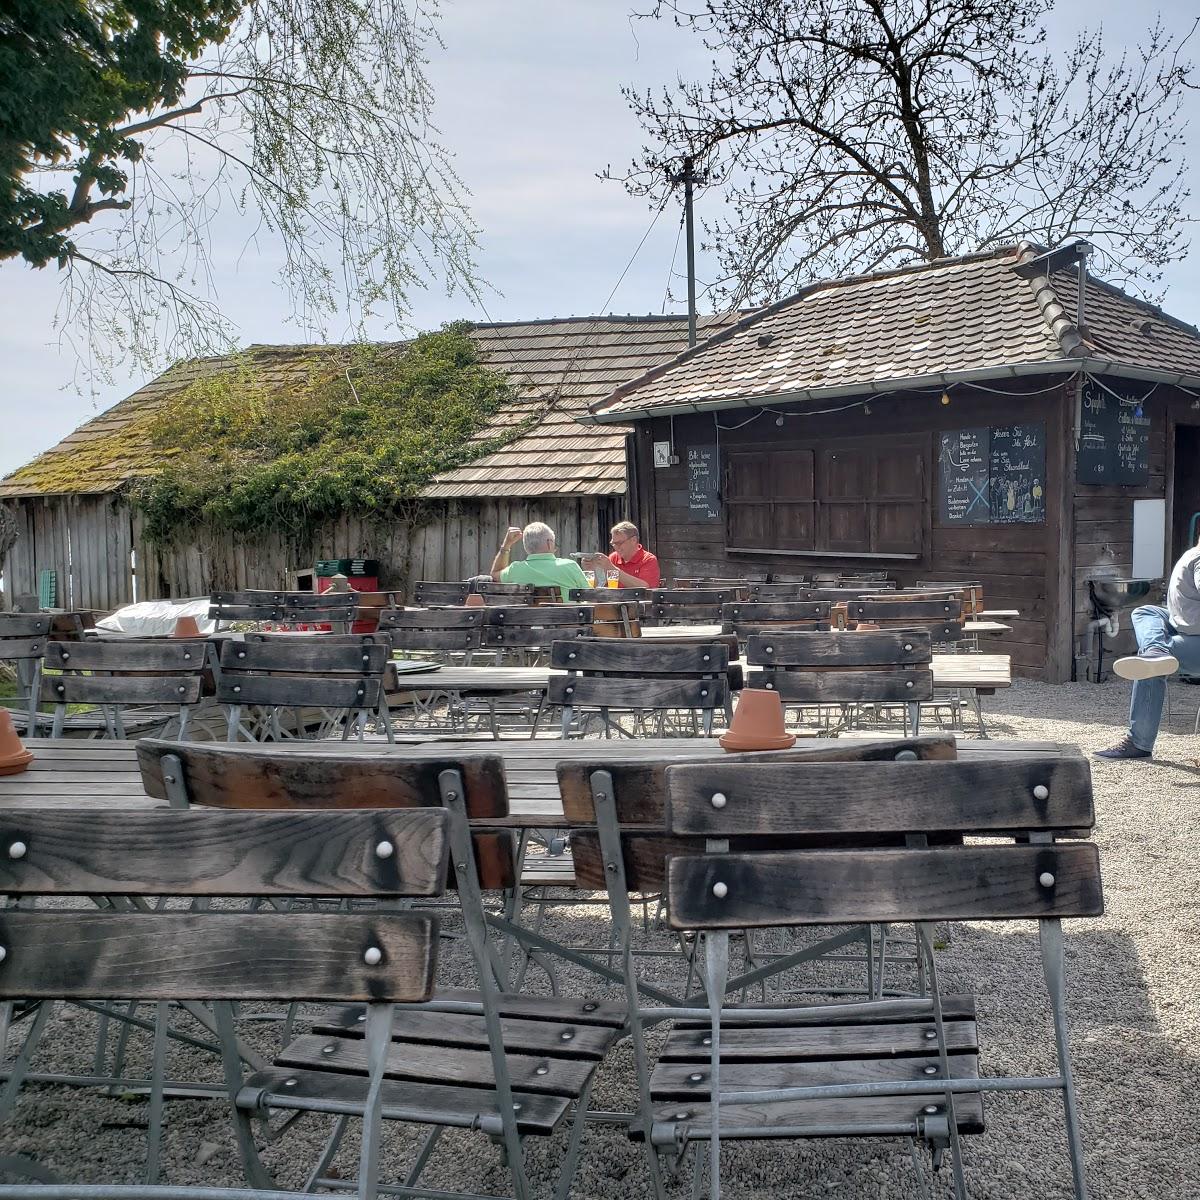 Restaurant "Strandbad Utting am Ammersee" in  Ammersee